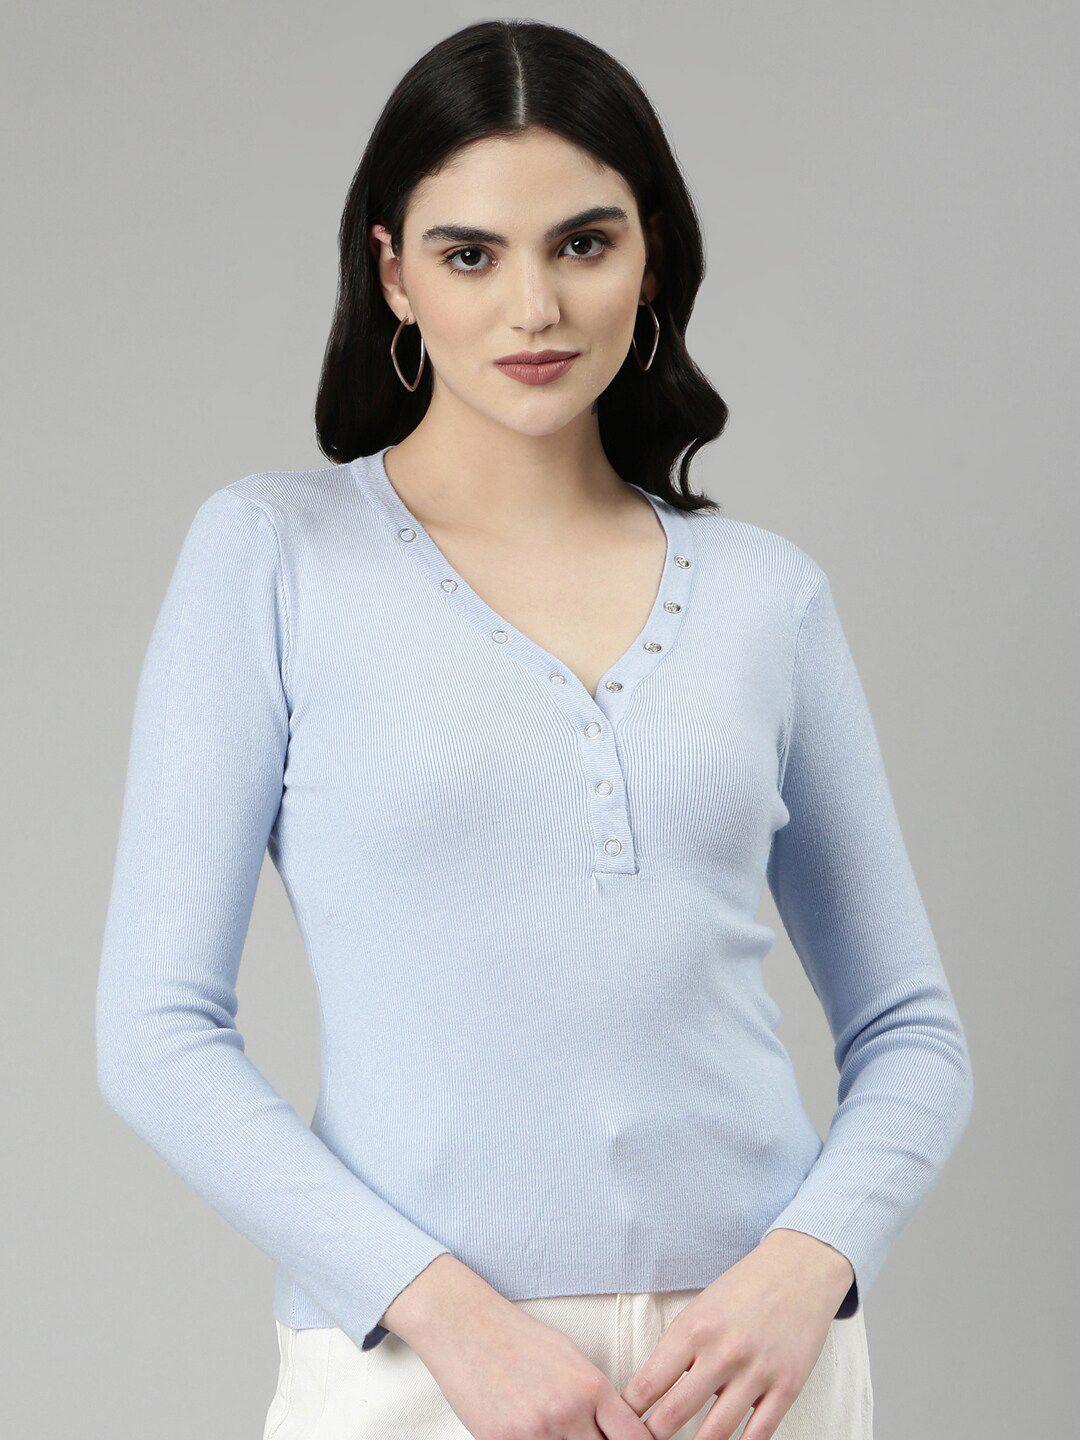 showoff v-neck long sleeves fitted top